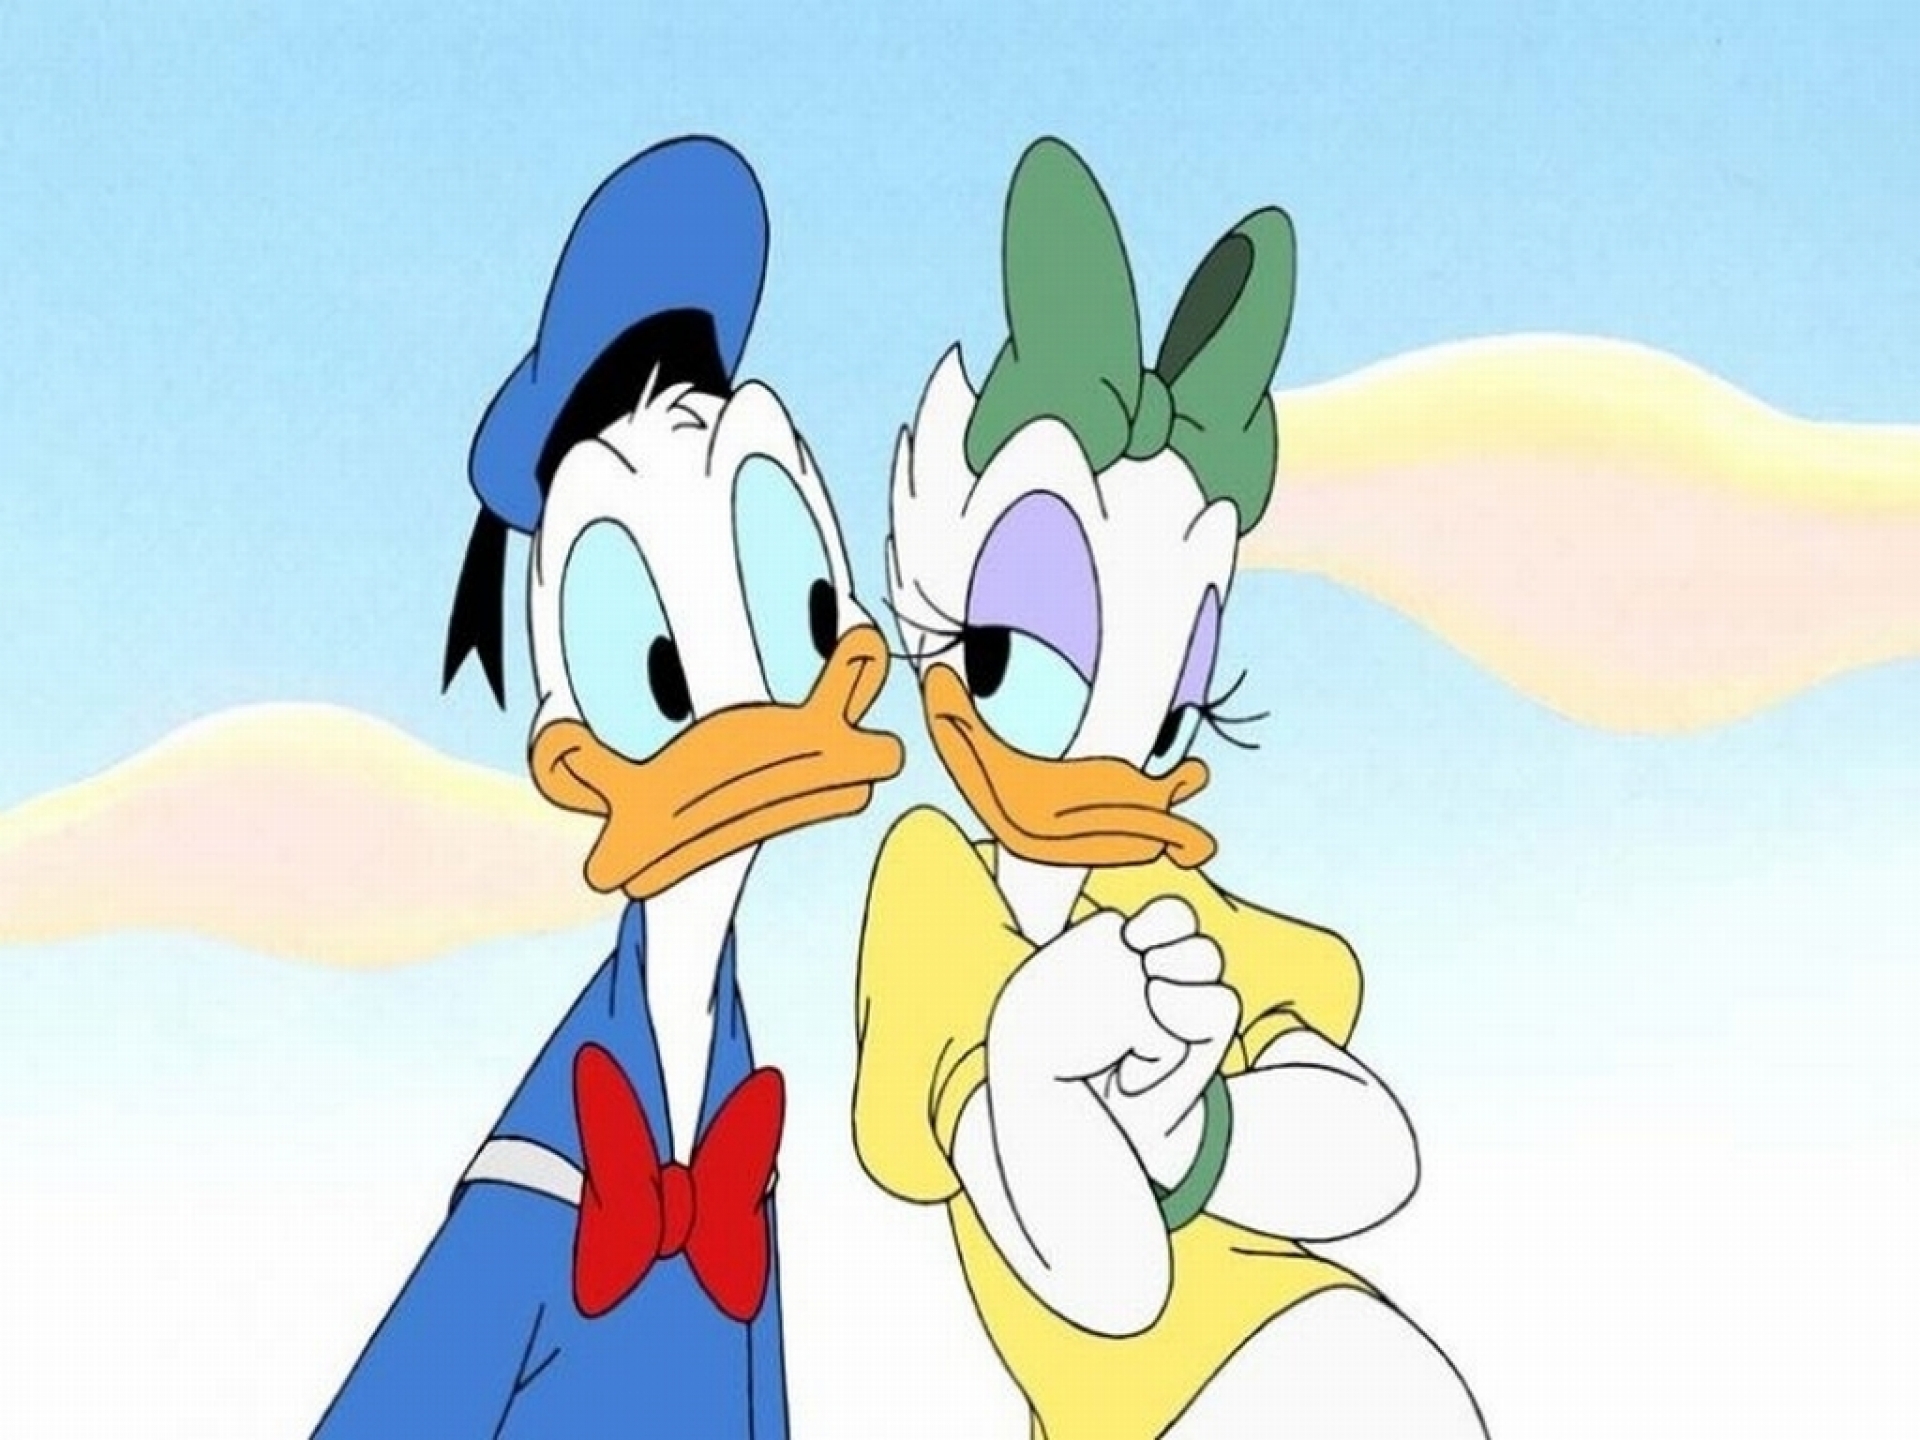 Donald duck and daisy wallpaper 1920x1080. 